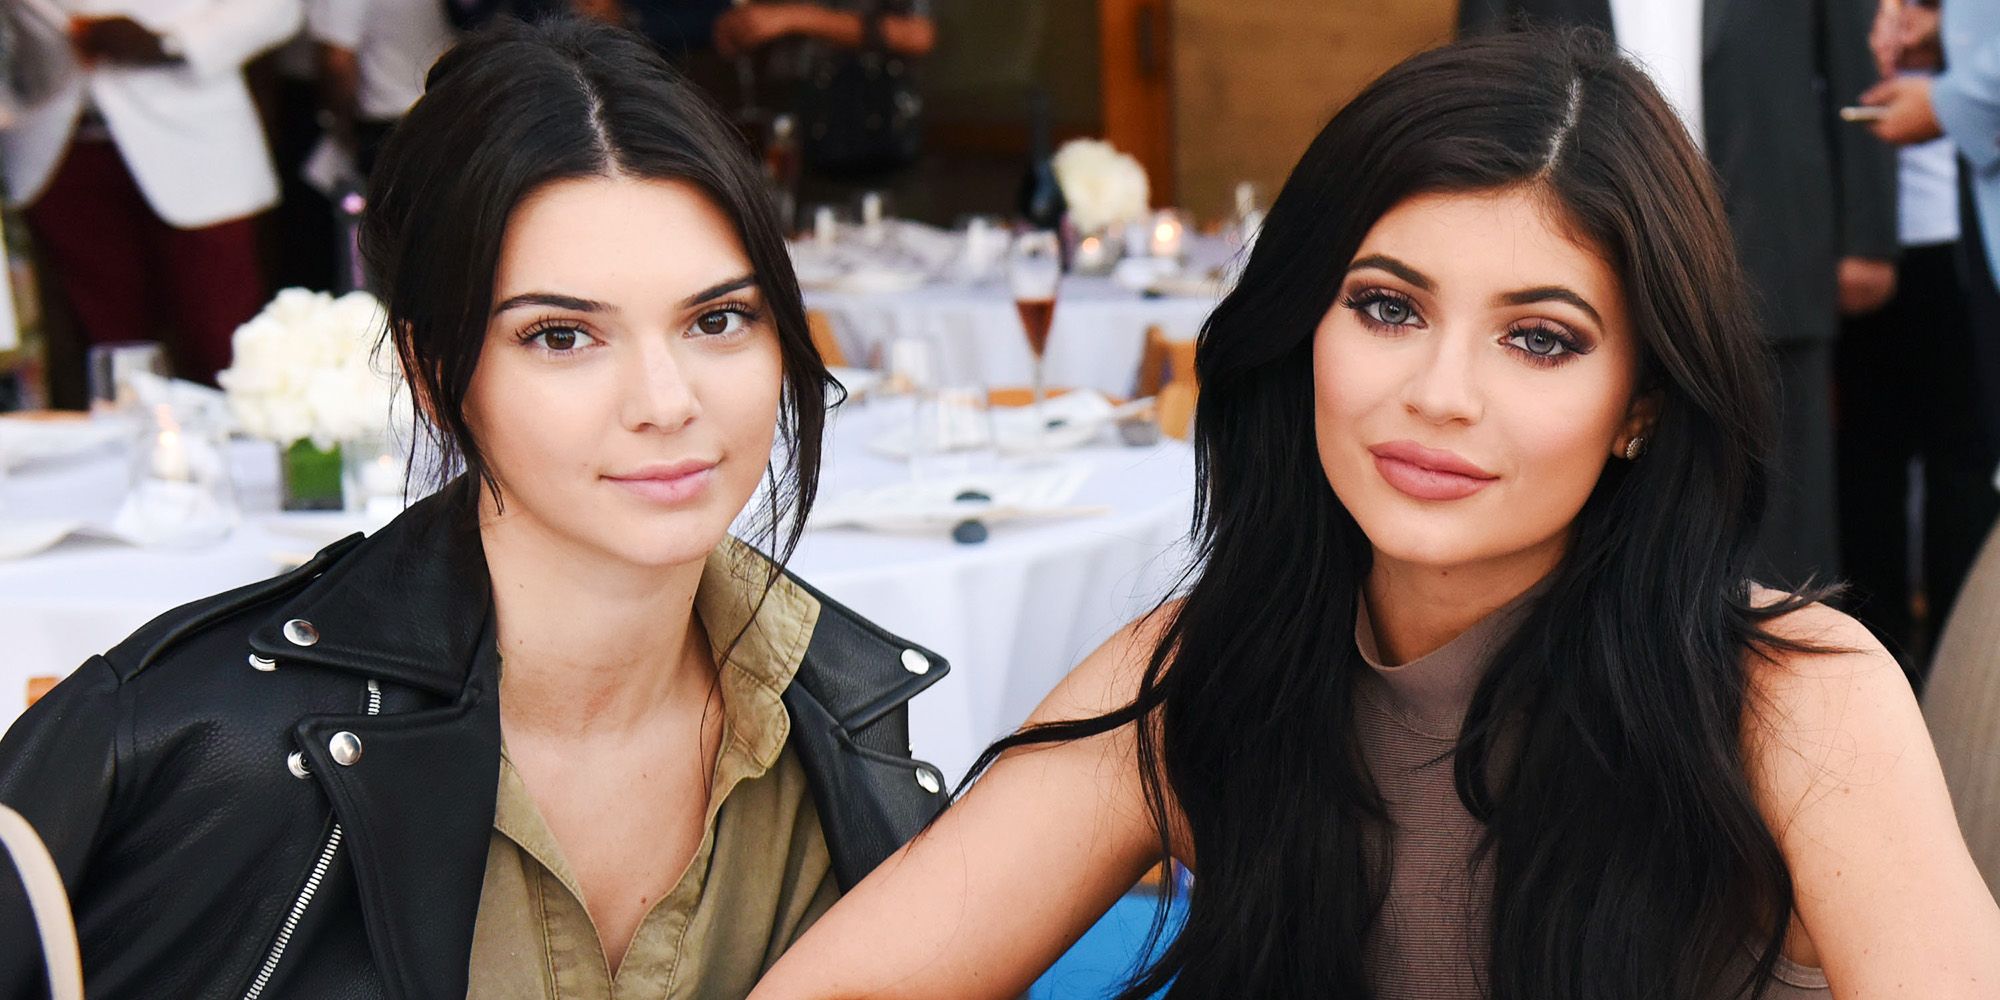 Kylie and Kendall Jenner Apologize For Putting Their Faces On Dead Hip-Hop